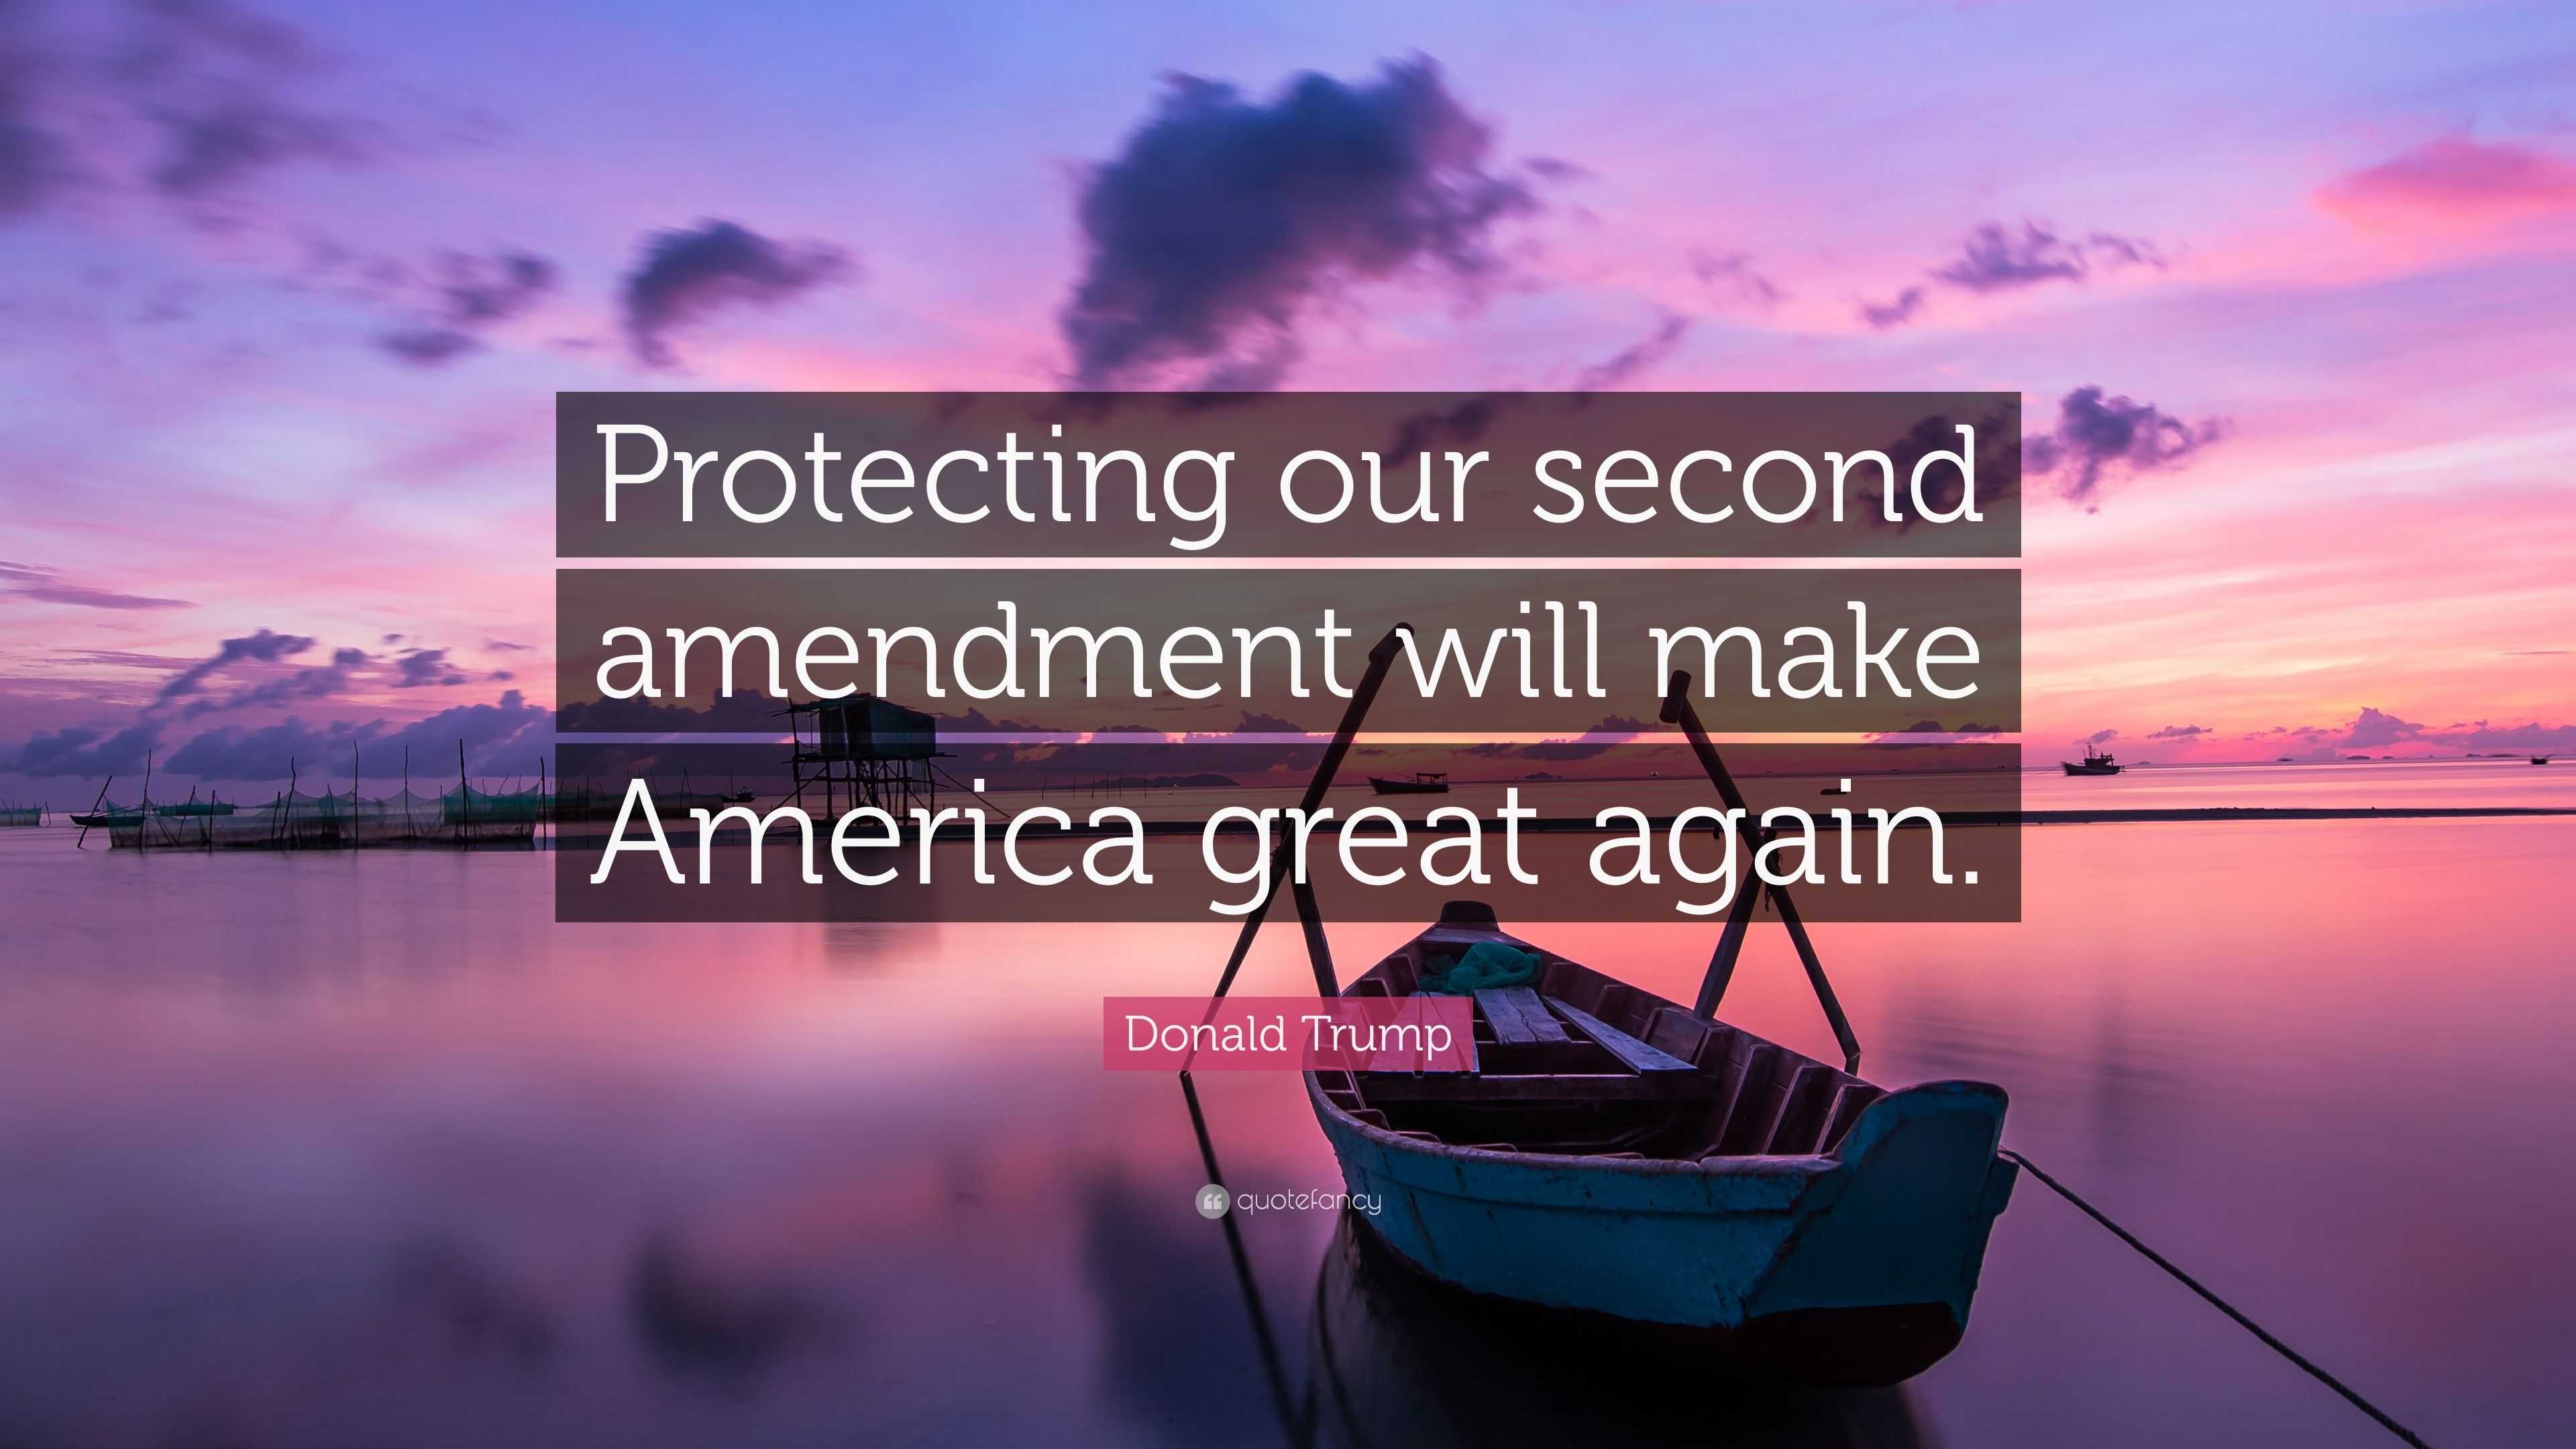 Donald Trump Quote: "Protecting our second amendment will ...